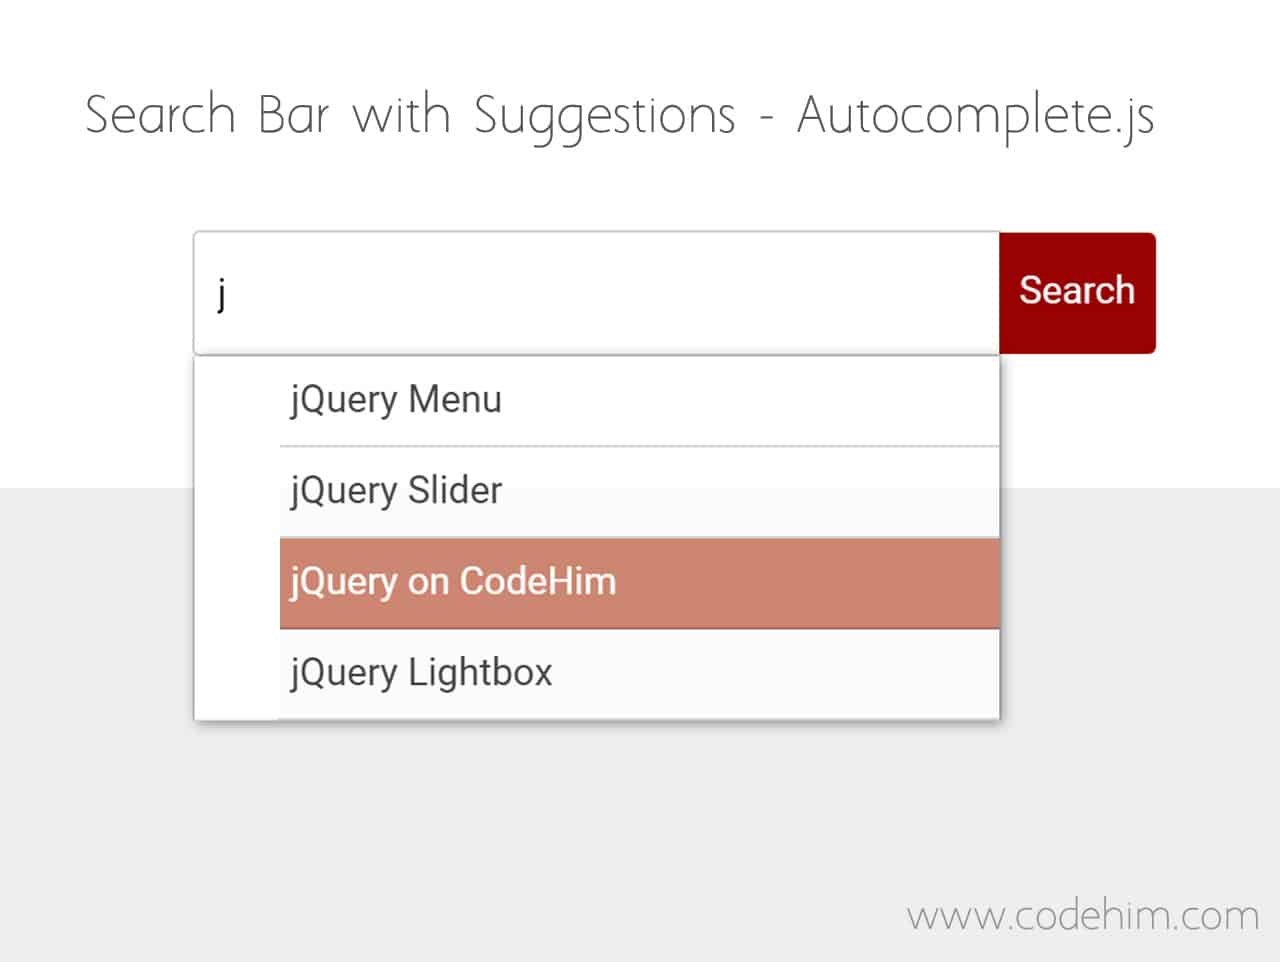 Search Bar with Suggestions using jQuery